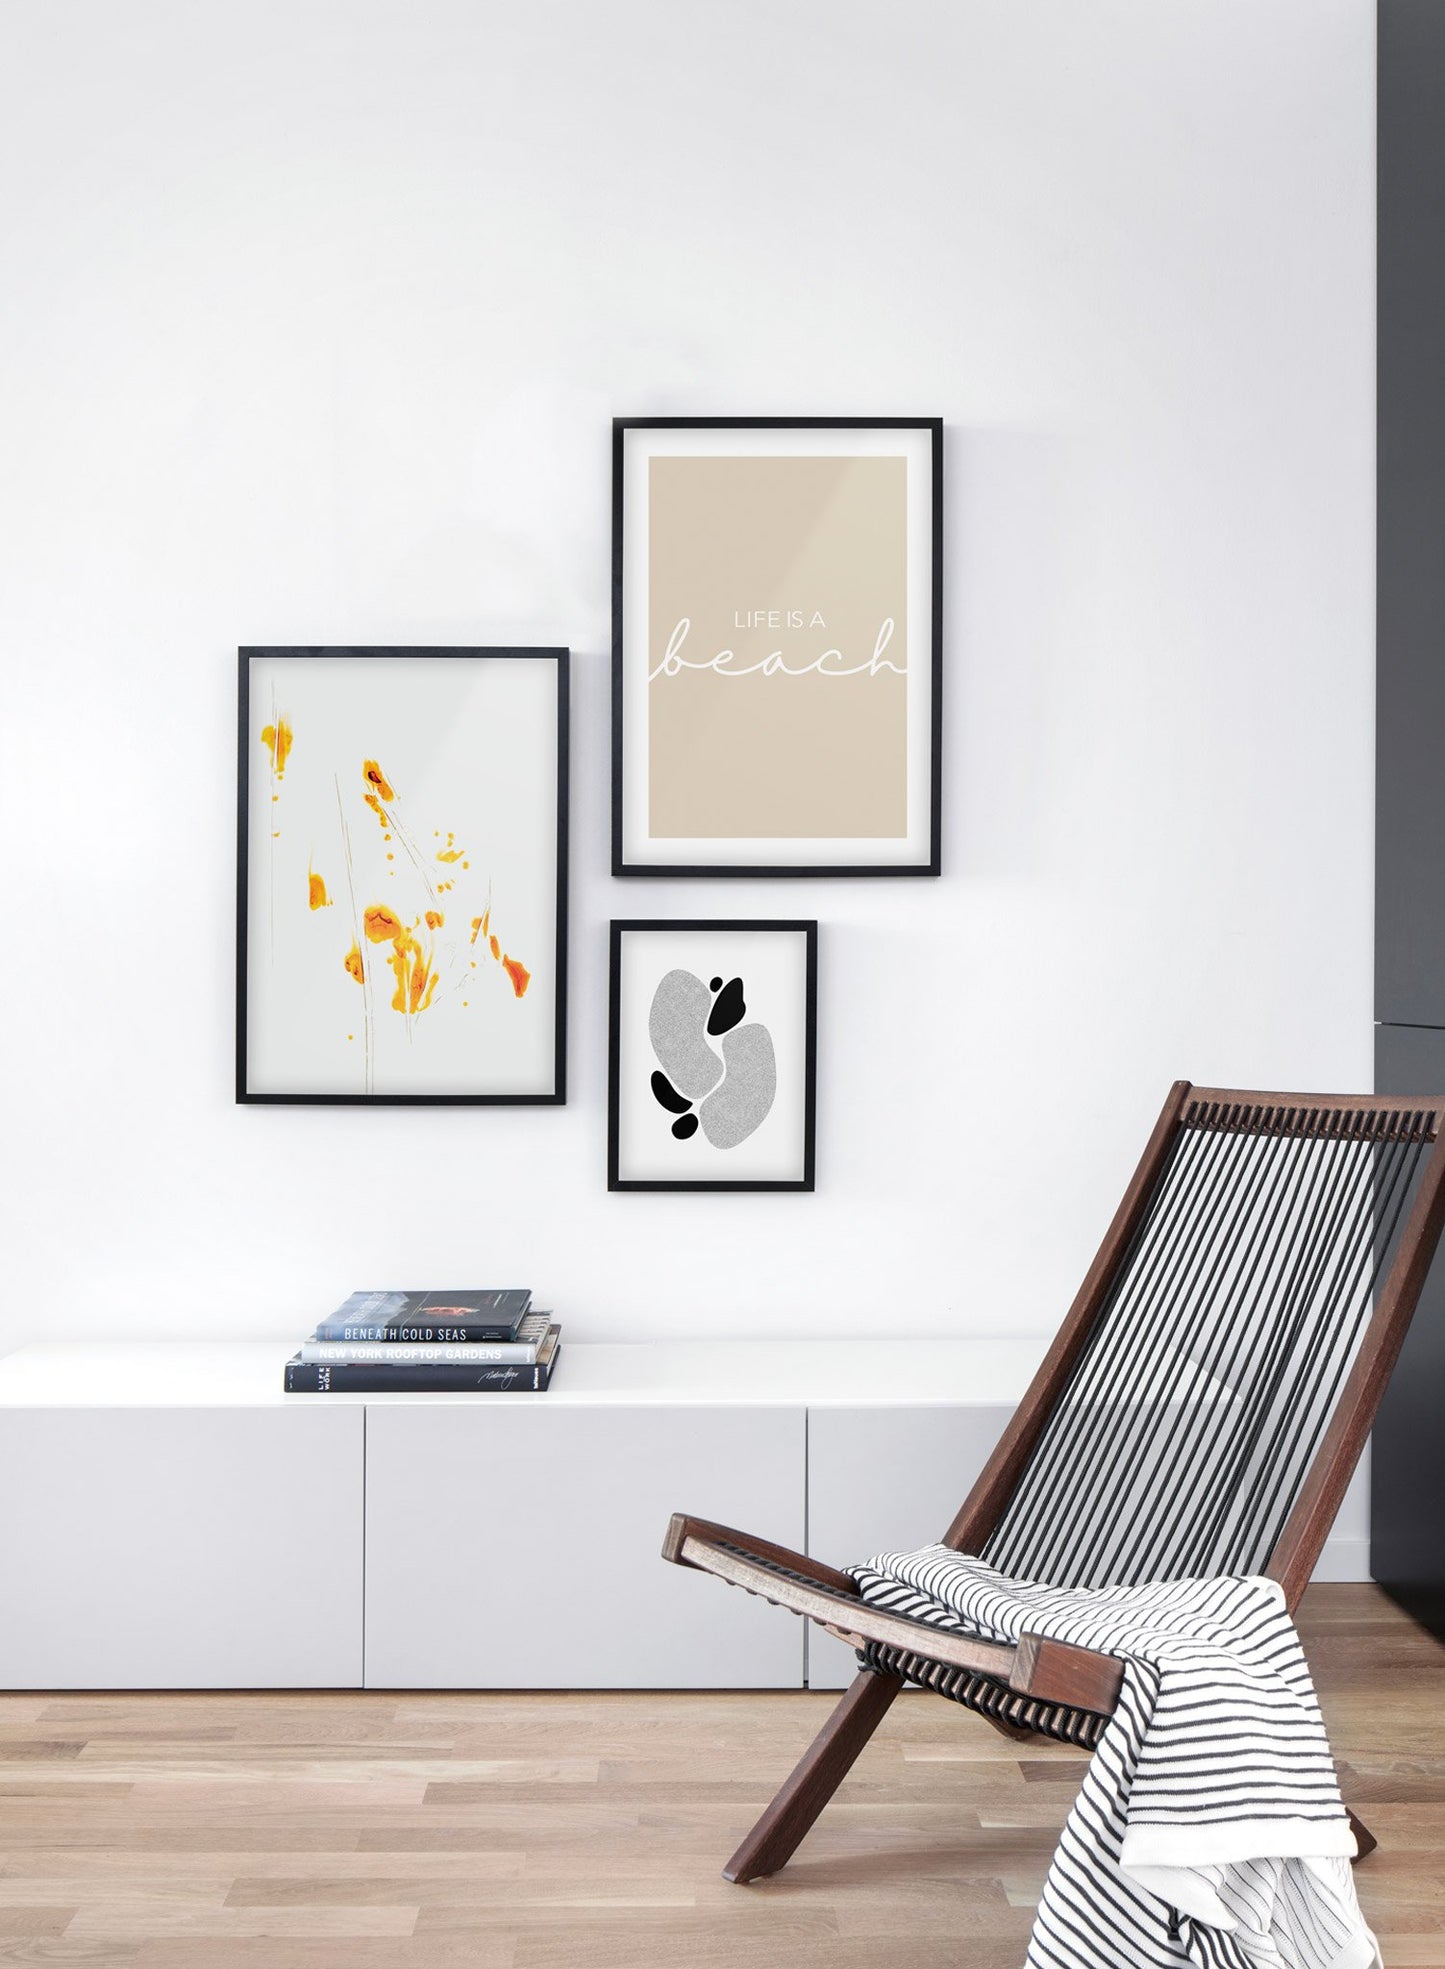 Bursts of Orange modern minimalist photography poster by Opposite Wall - Living room